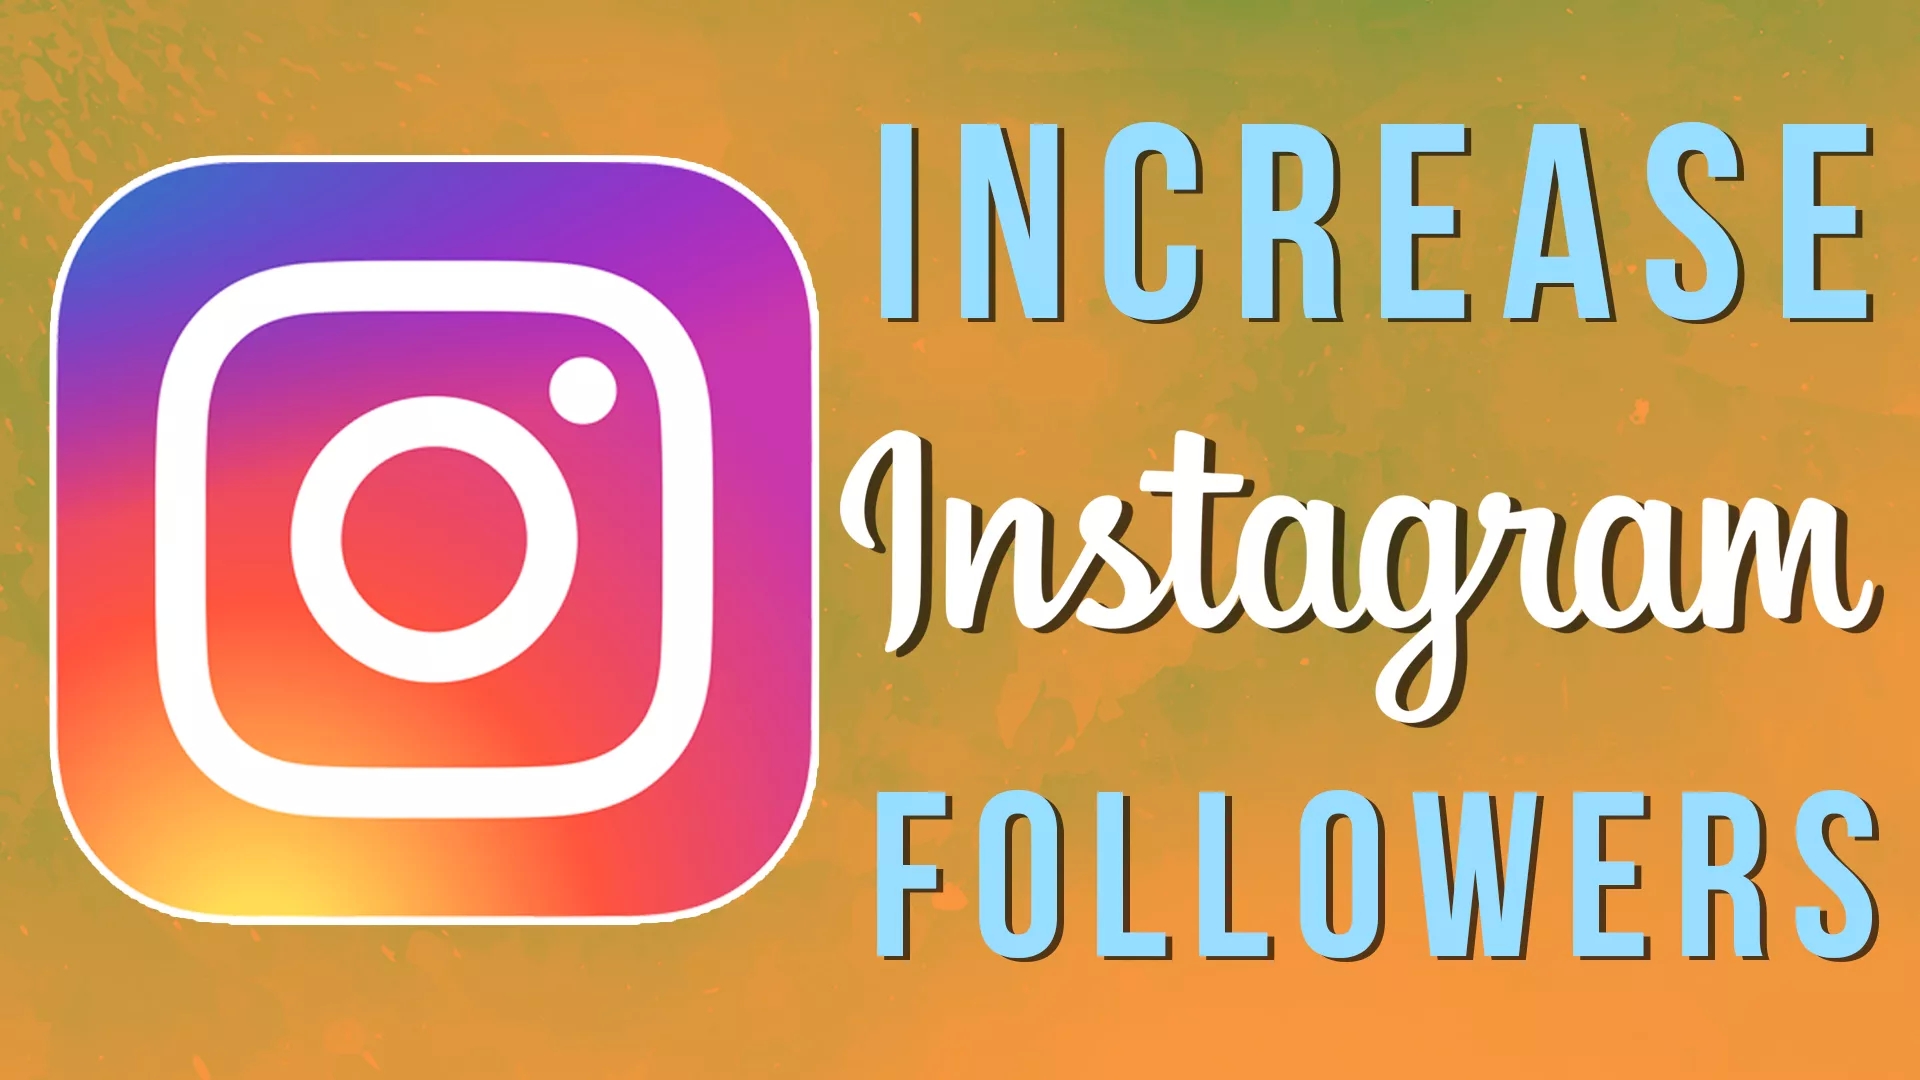 Why should you buy Instagram followers?